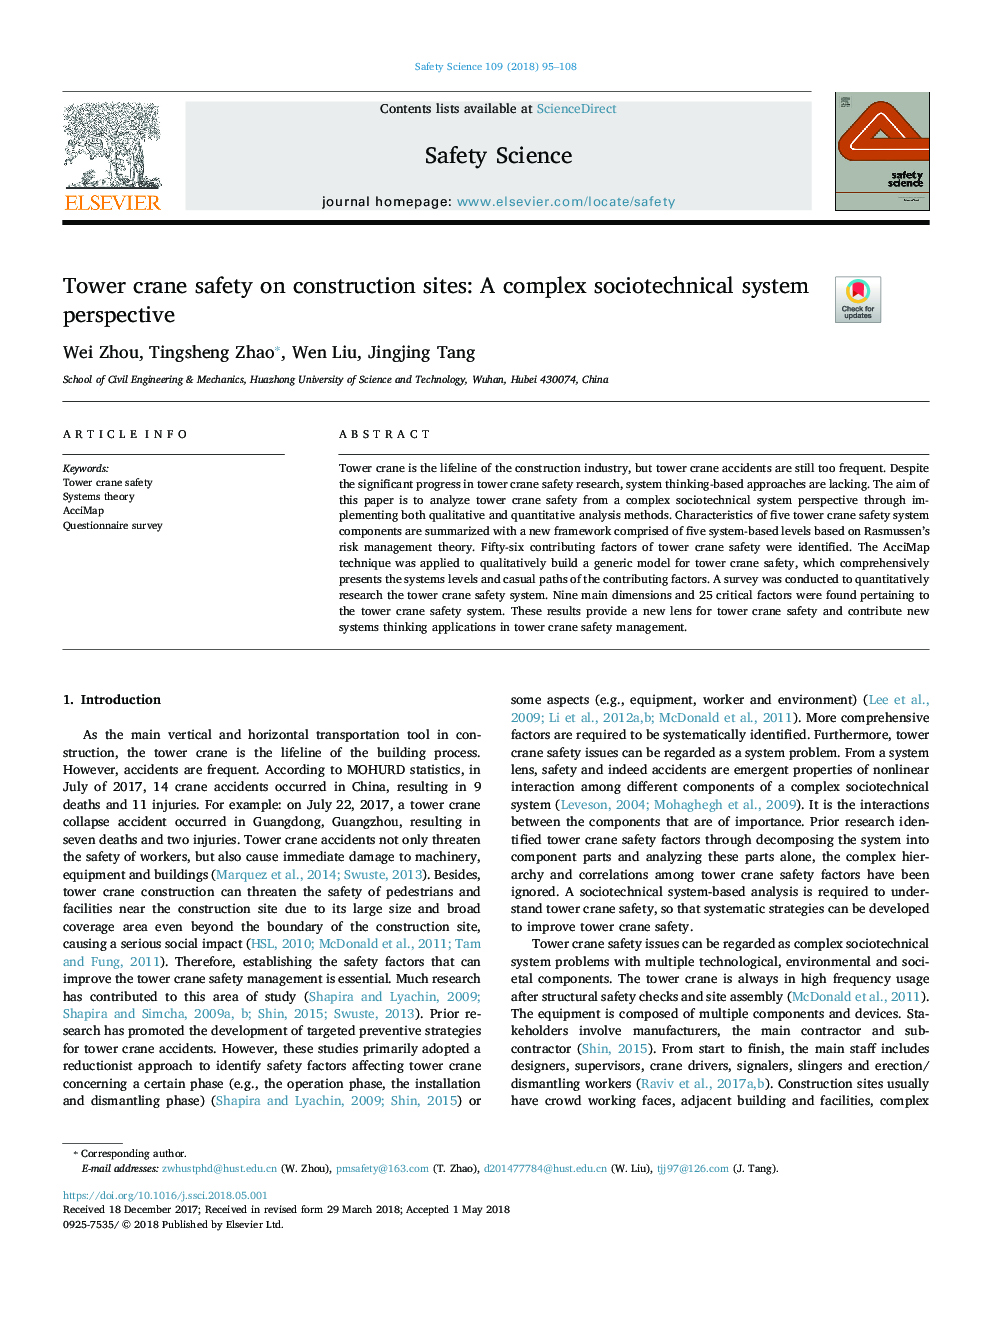 Tower crane safety on construction sites: A complex sociotechnical system perspective